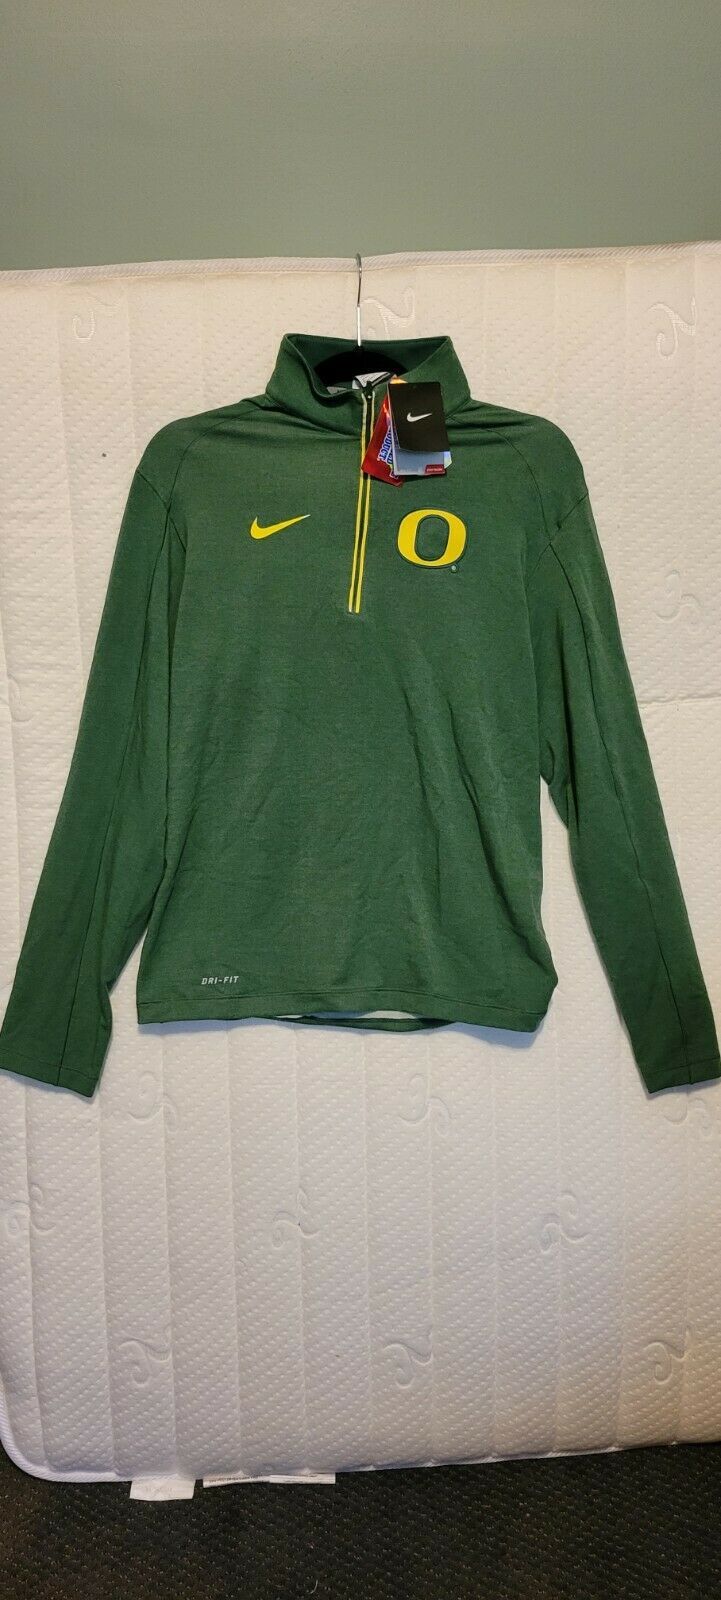 Primary image for New Nike Oregon Ducks Dri-fit Knit Top Small Jacket Get & Stay Warm